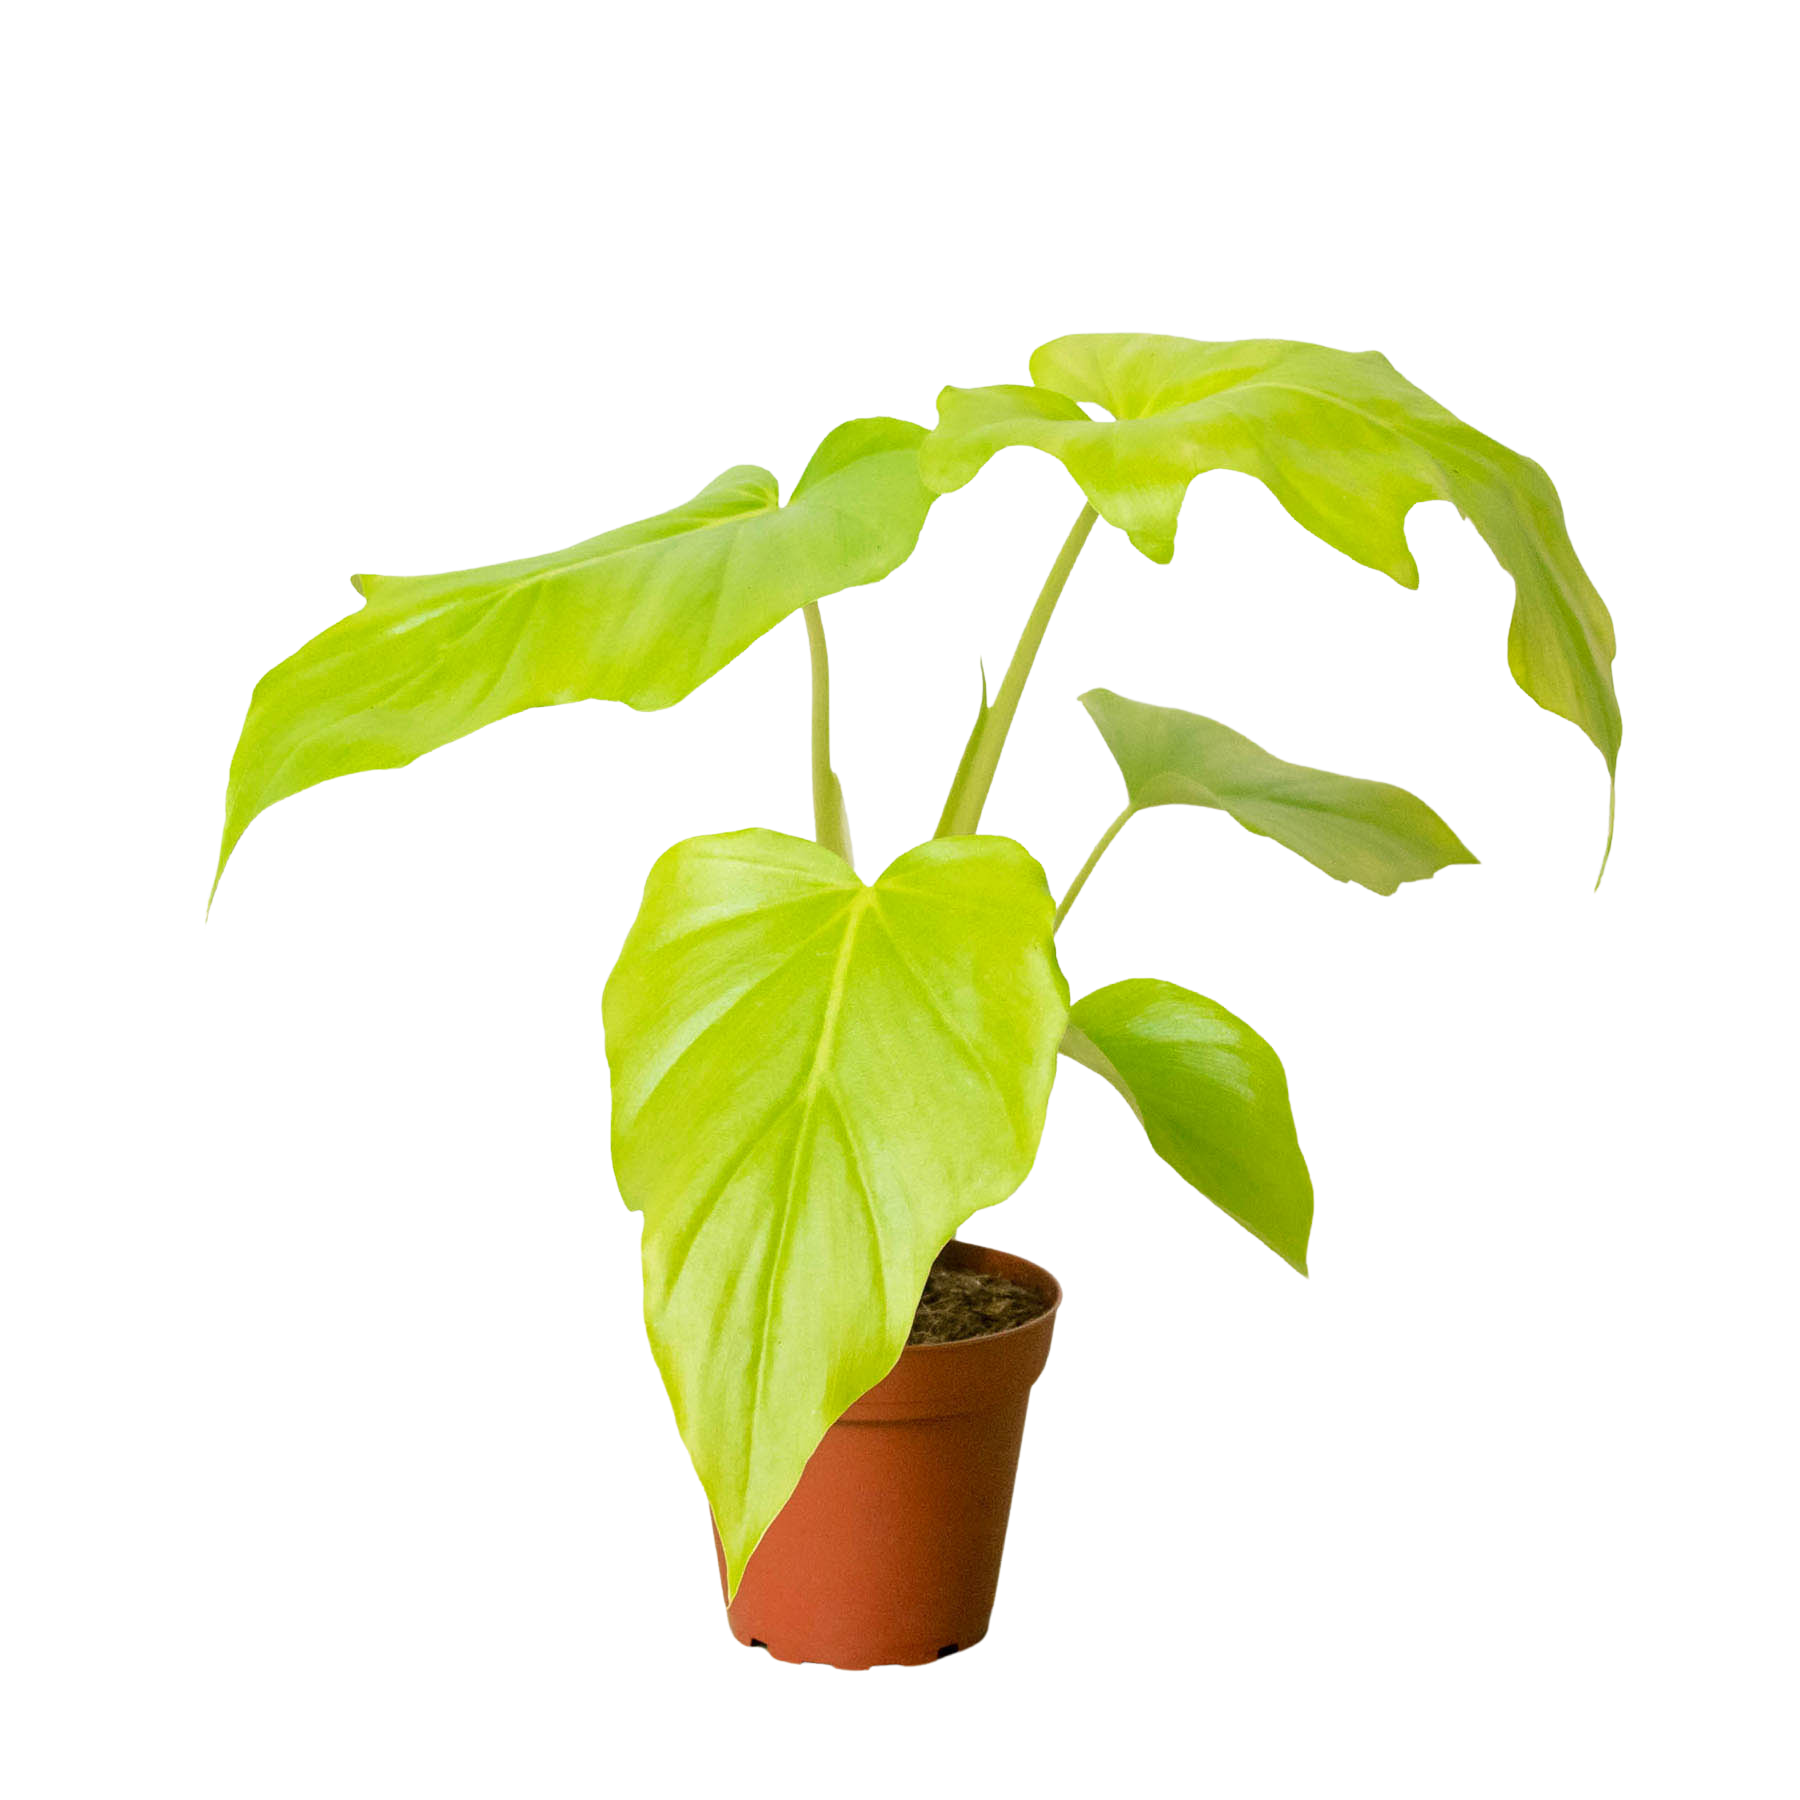 A green plant in a pot, showcased against a clean white background.